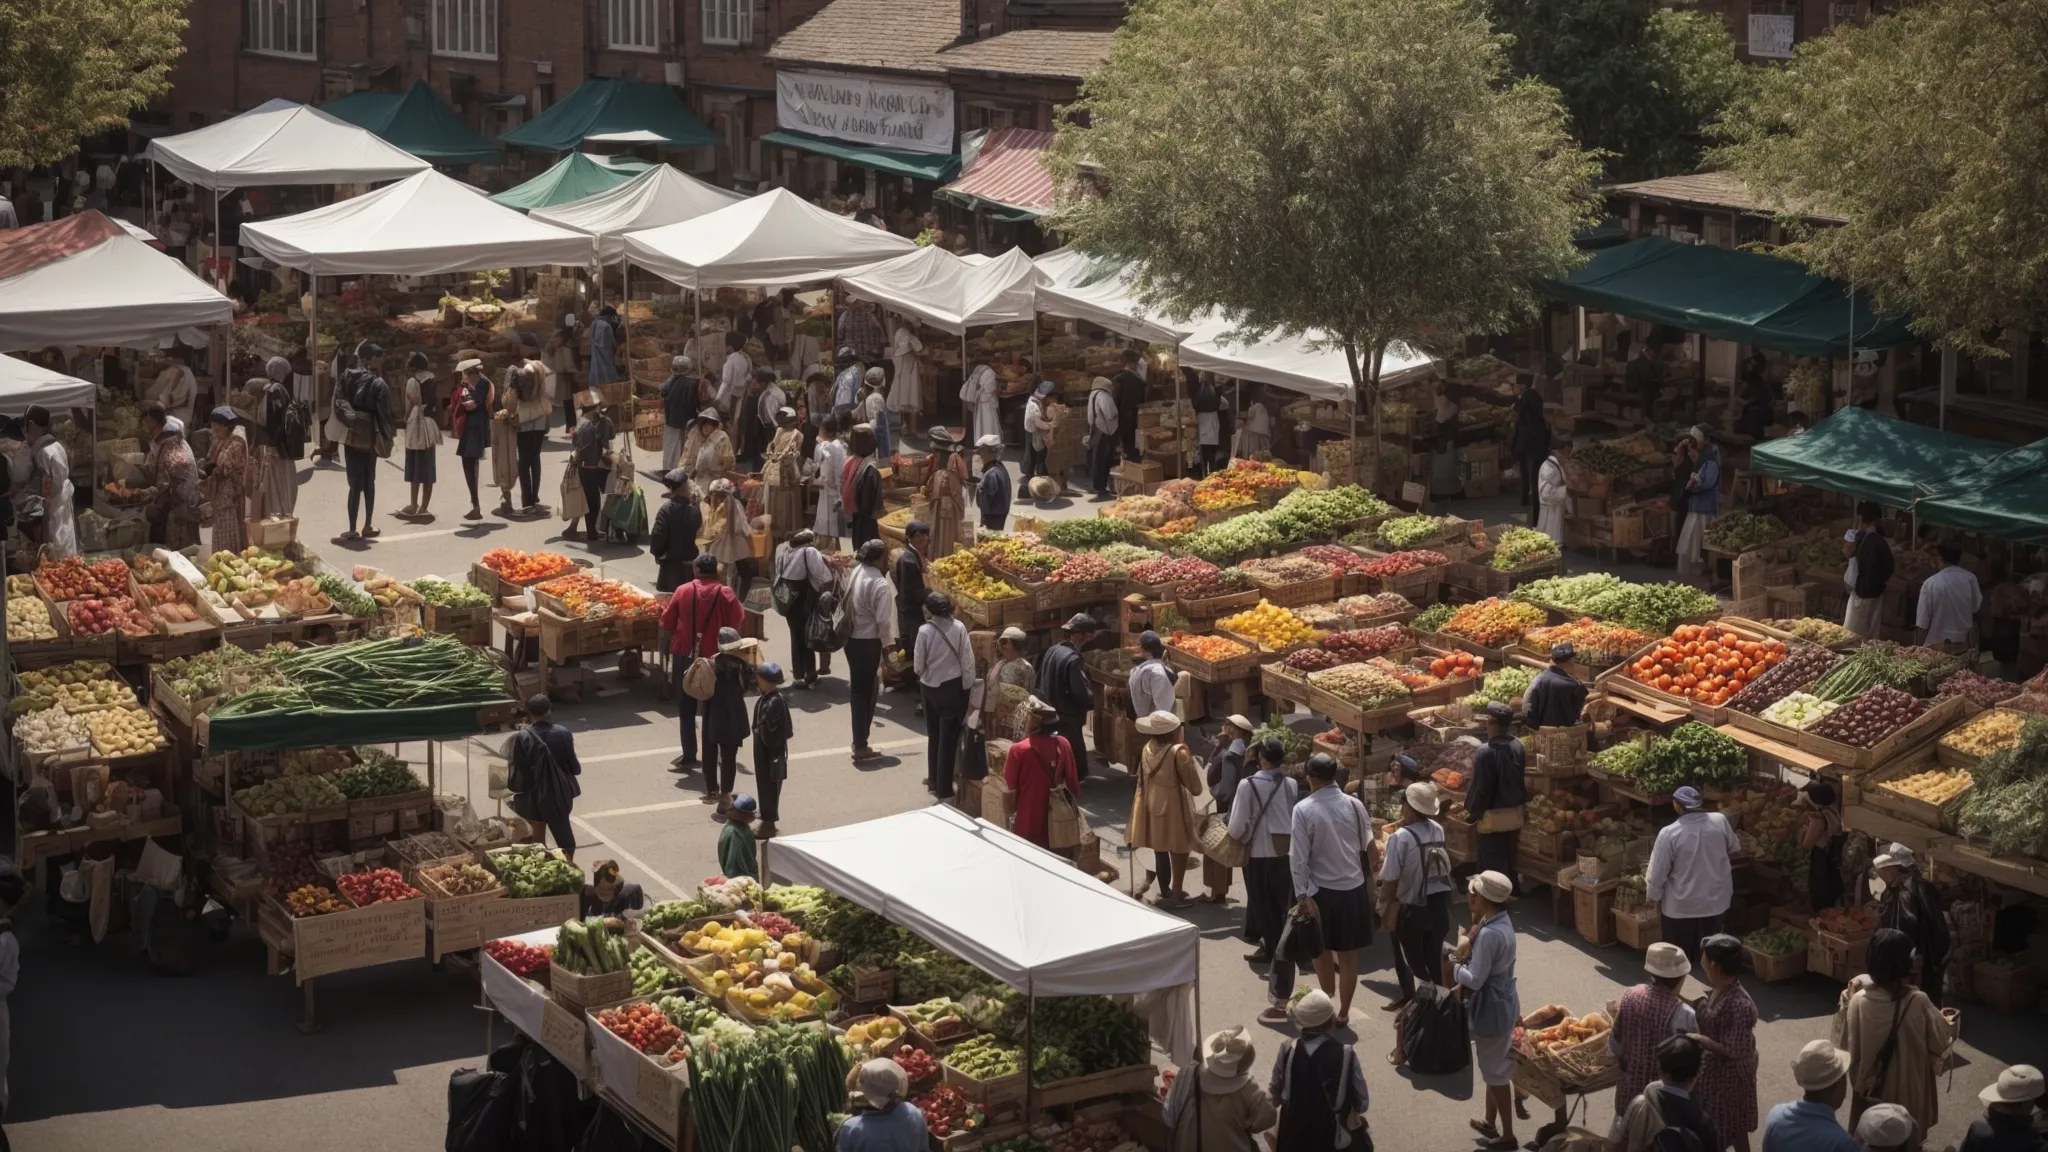 a bustling farmers' market with an array of produce stalls under a clear sky, showcasing diverse local products to community visitors.